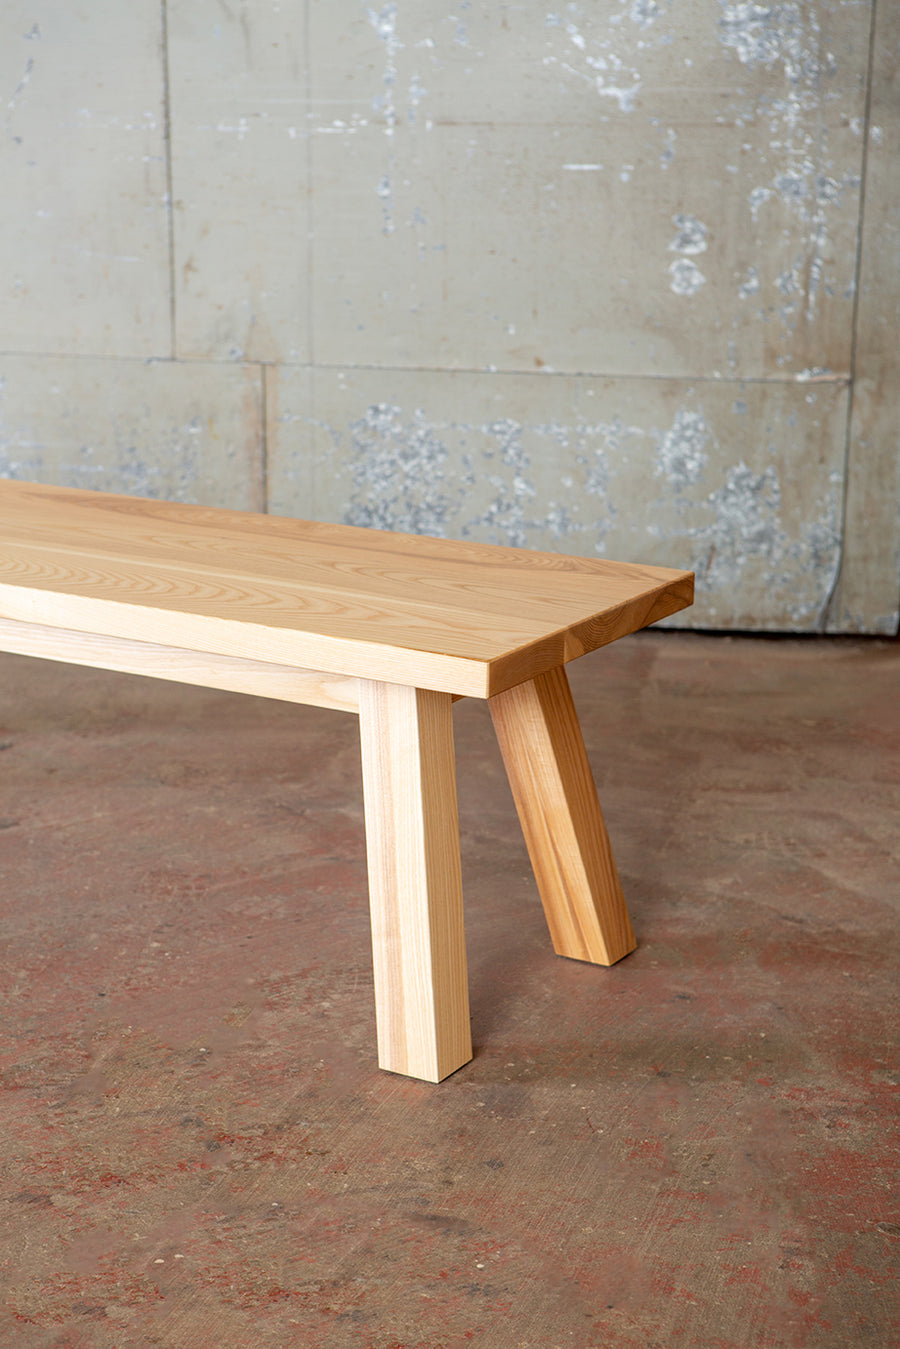 solid wood bench angled legs